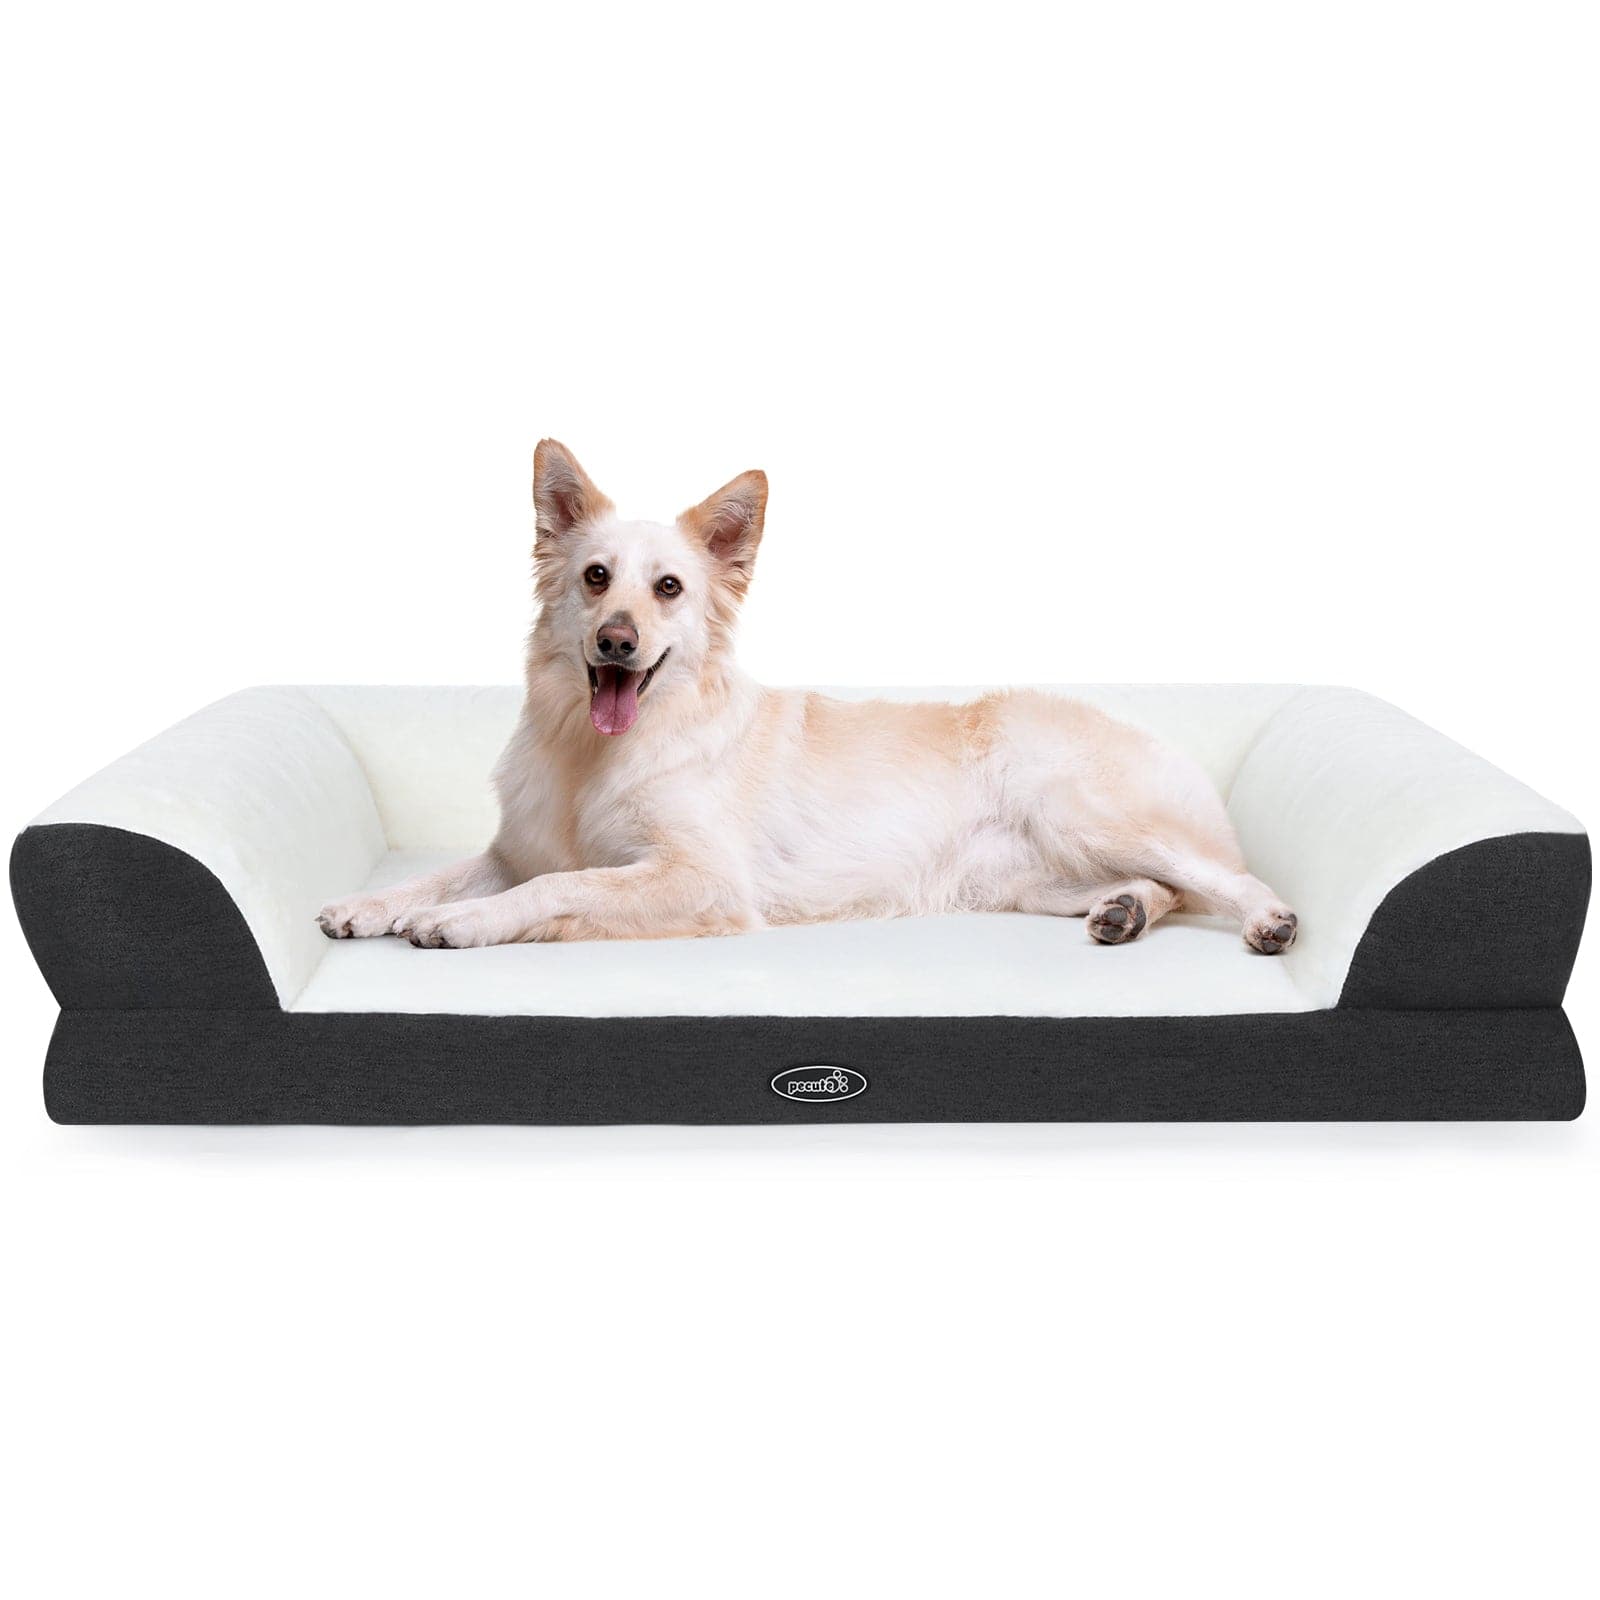 Pecute Dog Bed for Dogs Orthopedic (L).